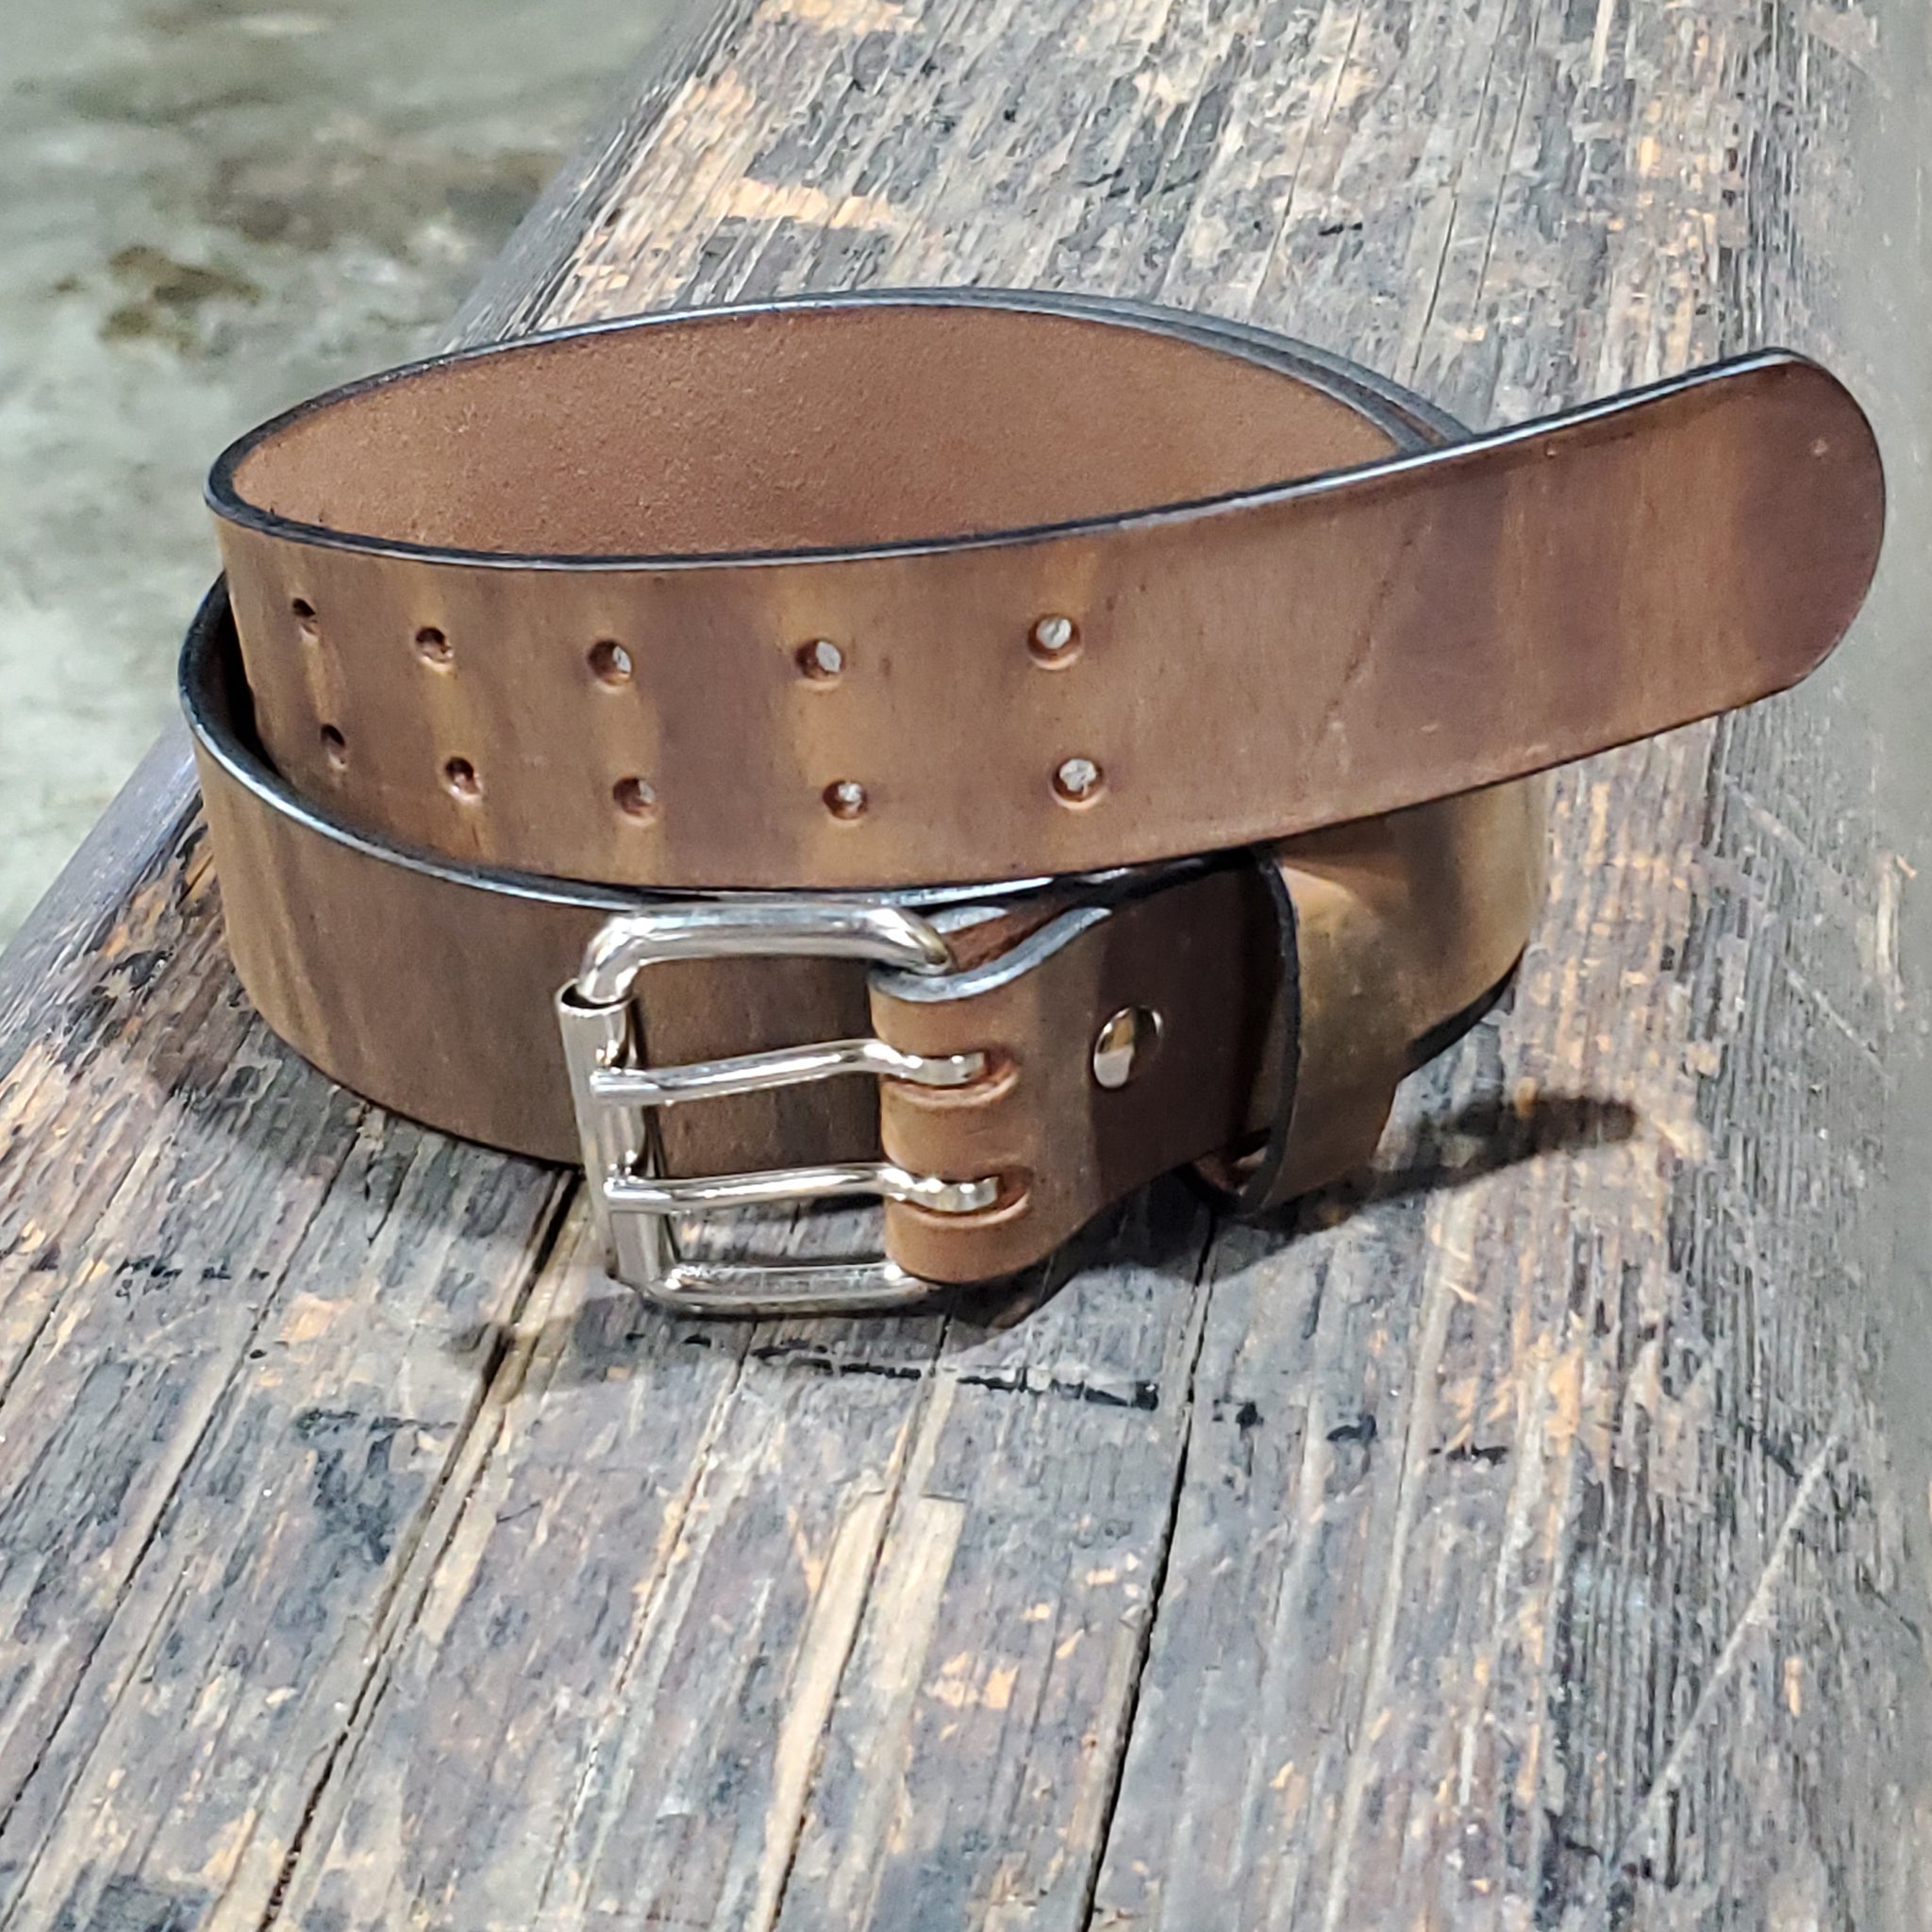 Naked Grizzly, MADE IN USA, Full Grain Leather